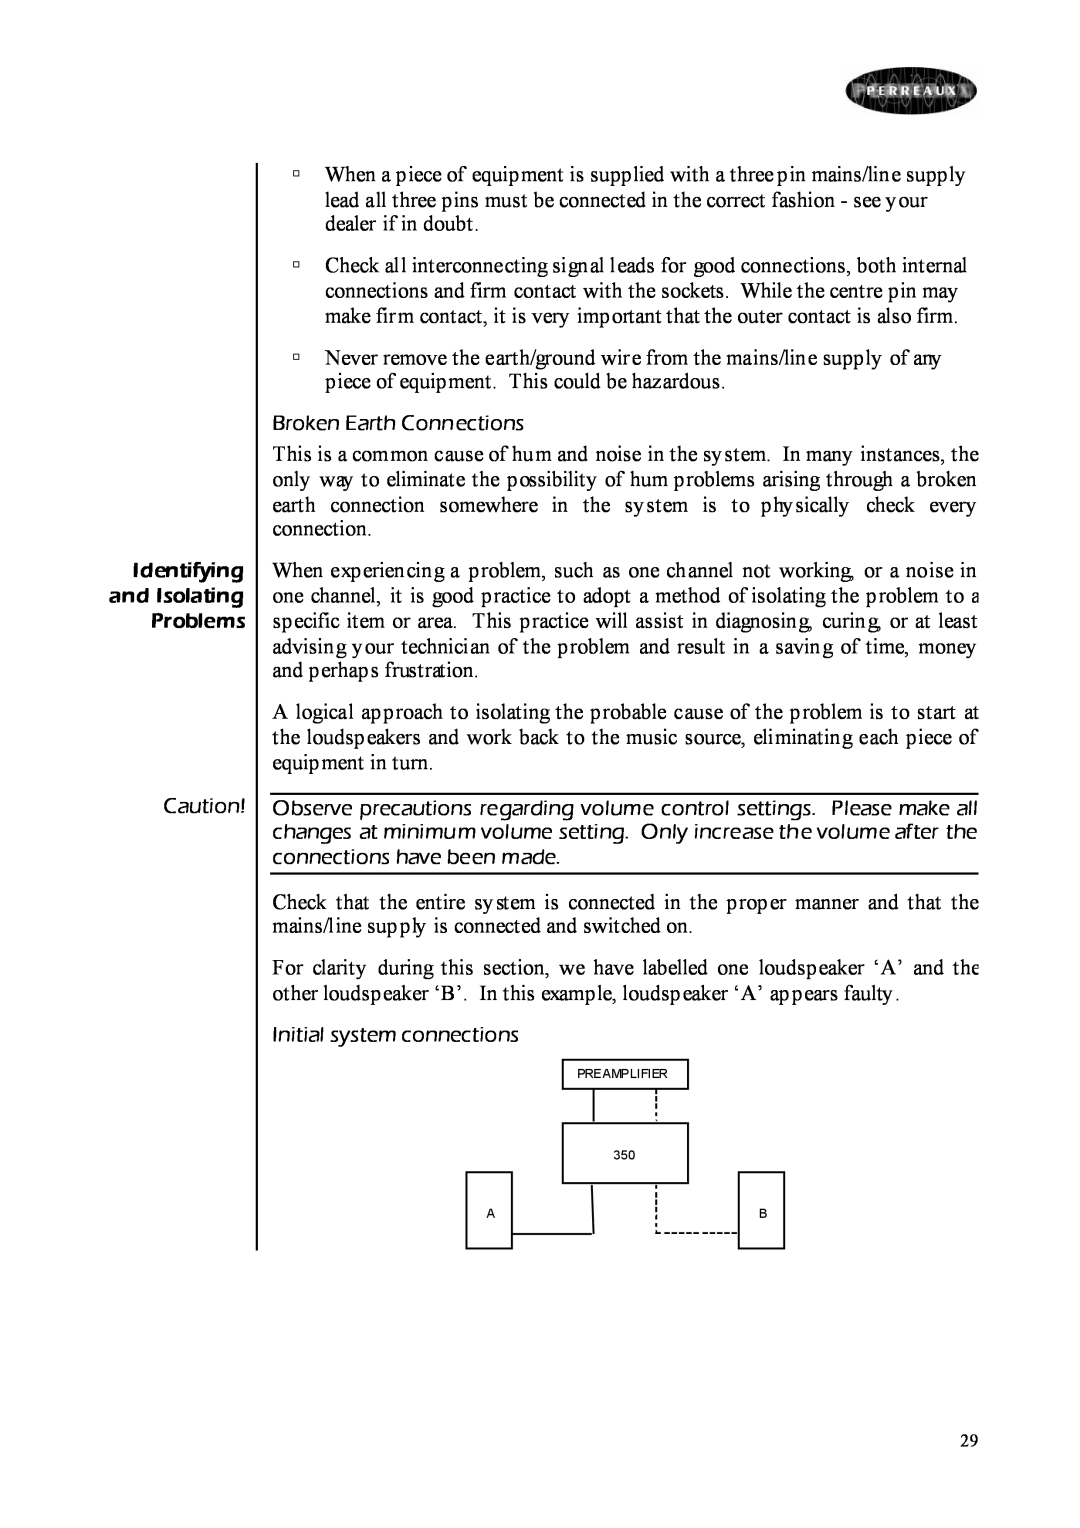 Perreaux Prisma 350 owner manual Identifying and Isolating Problems, Broken Earth Connections, Initial system connections 